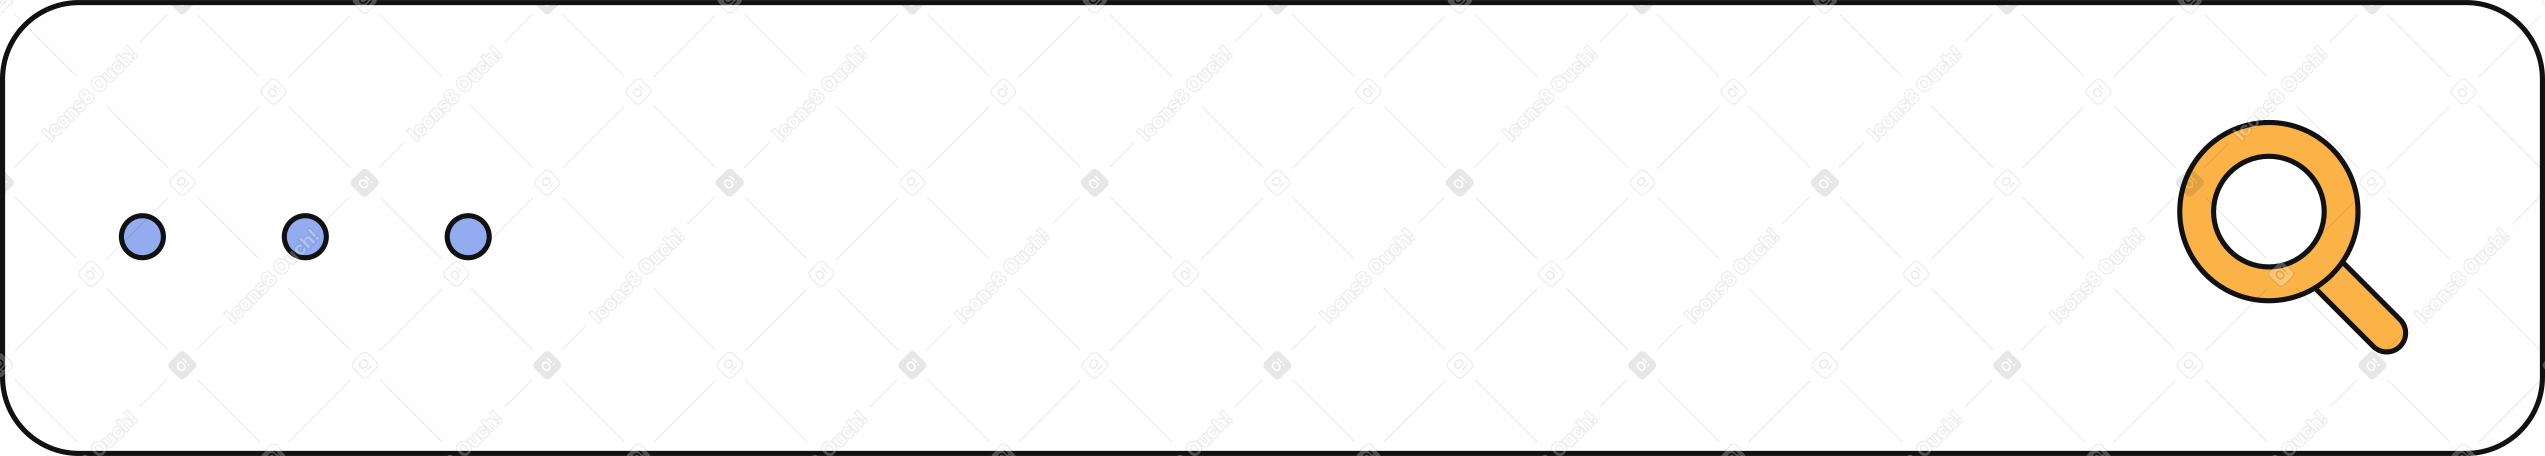 search bar with magnifying glass Illustration in PNG, SVG